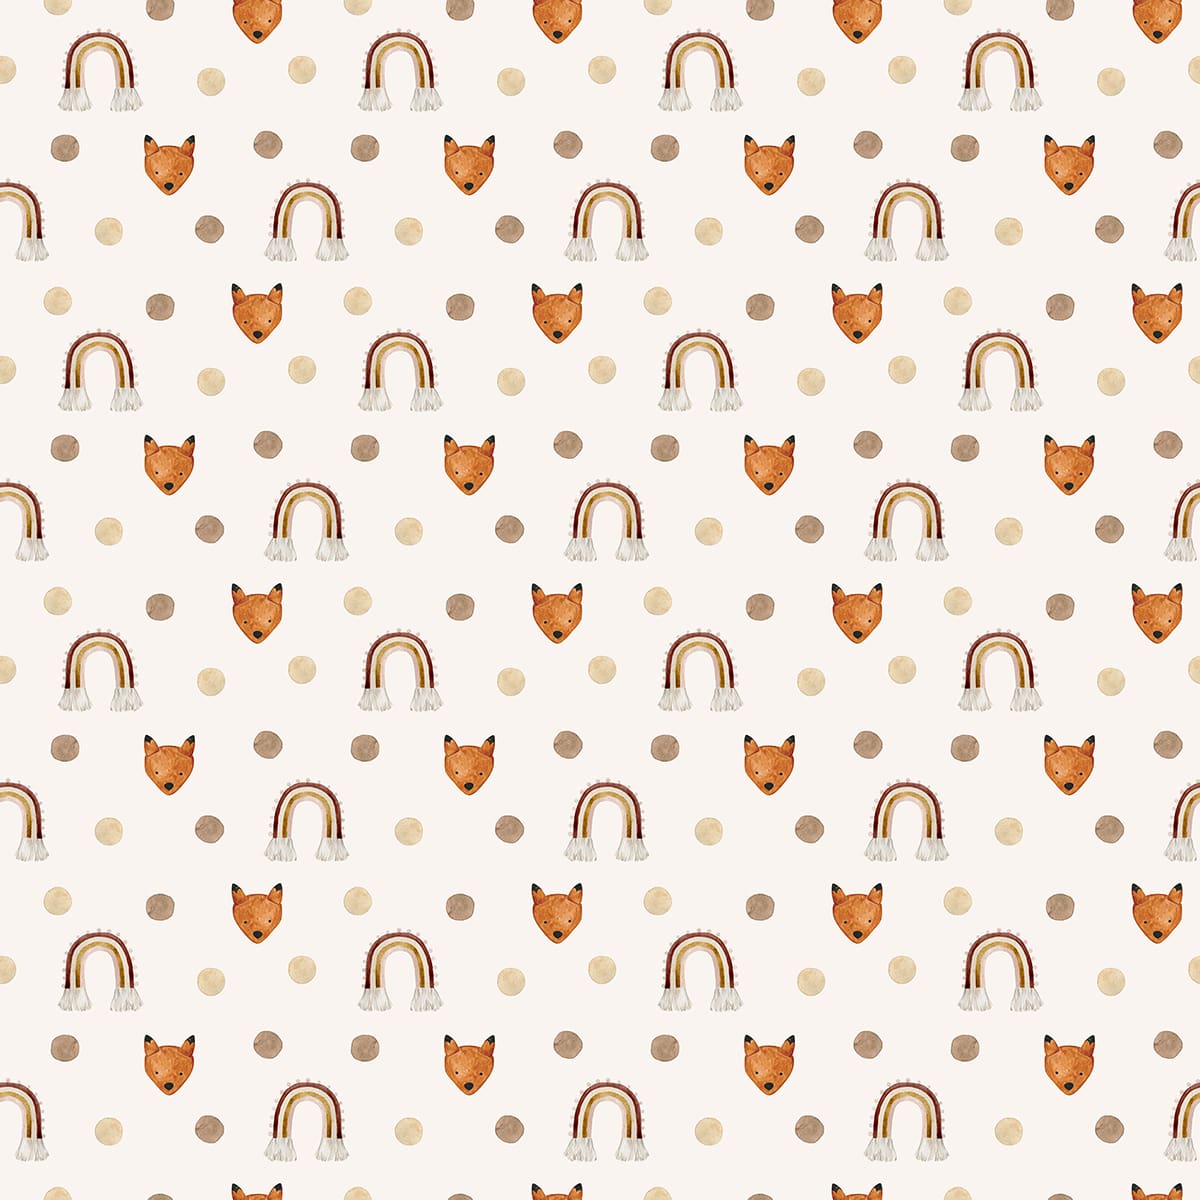 A pattern of fox and rainbows